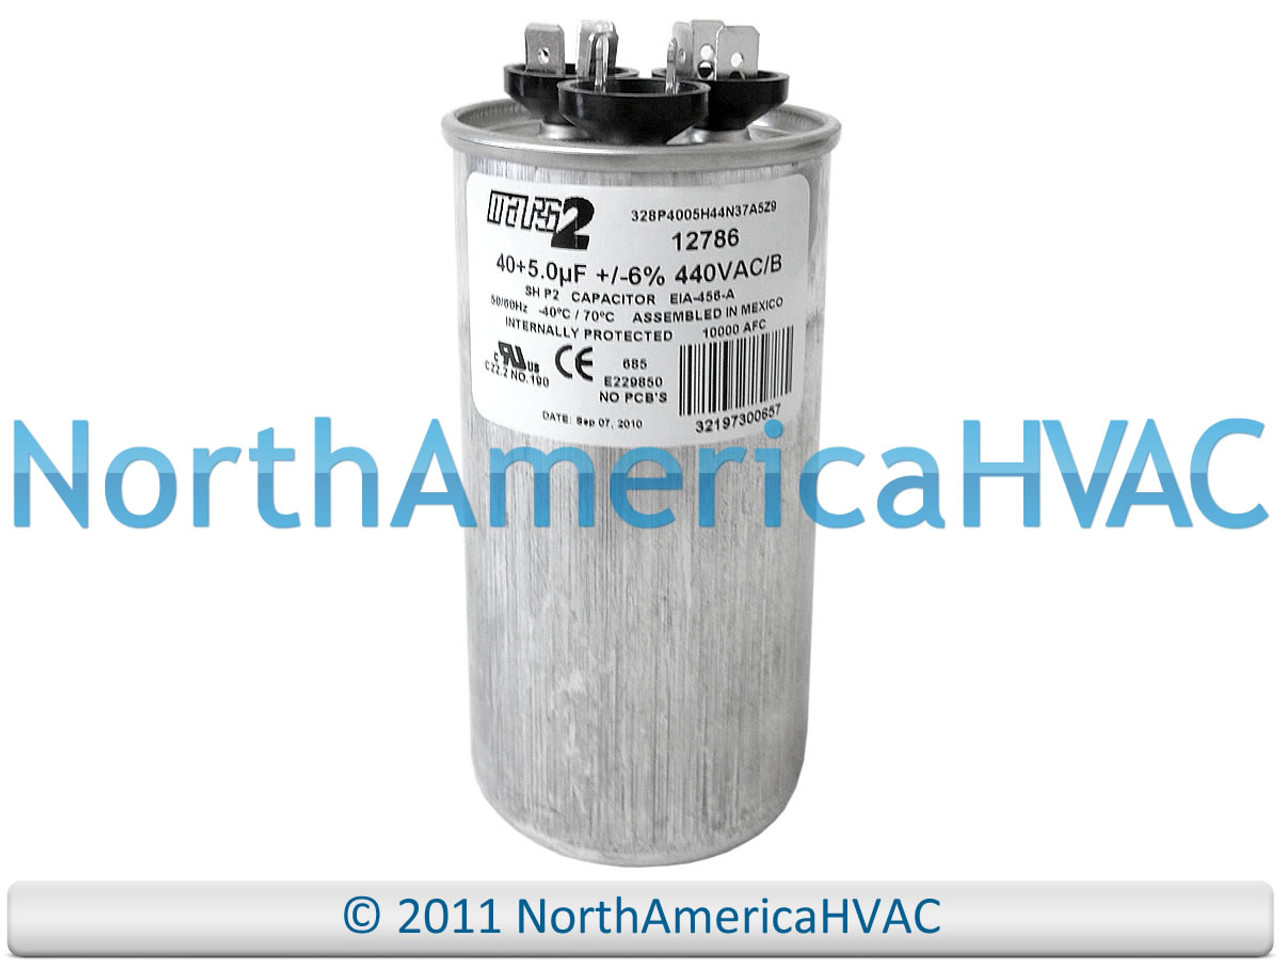 45 uf/Mfd 370/440 VAC AmRad Round Universal Capacitor Mars 12248 Replacement Made in The U.S.A. 